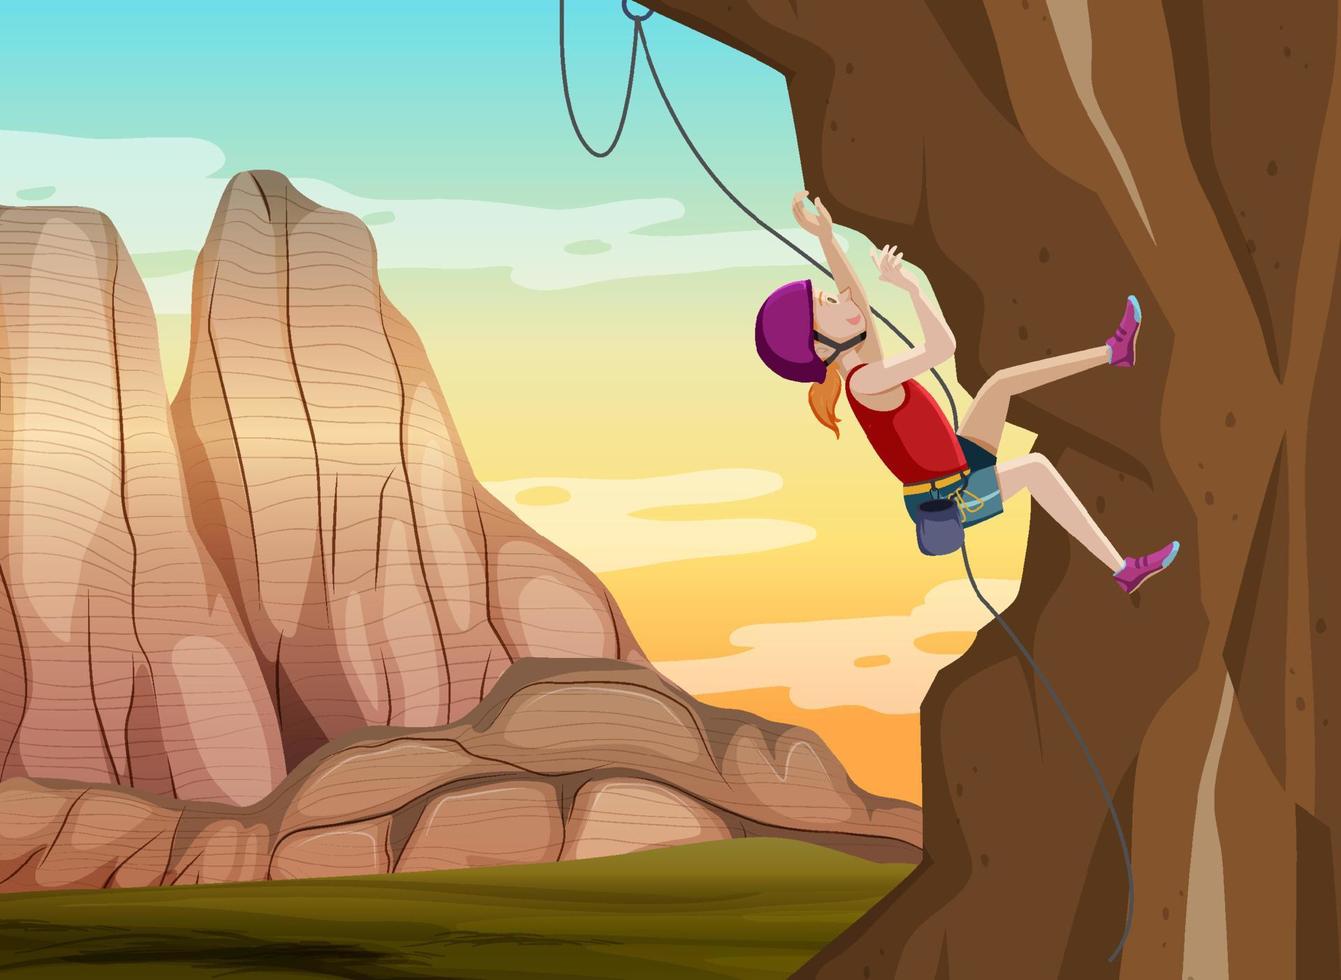 Scene with people climbing rocky moutain vector